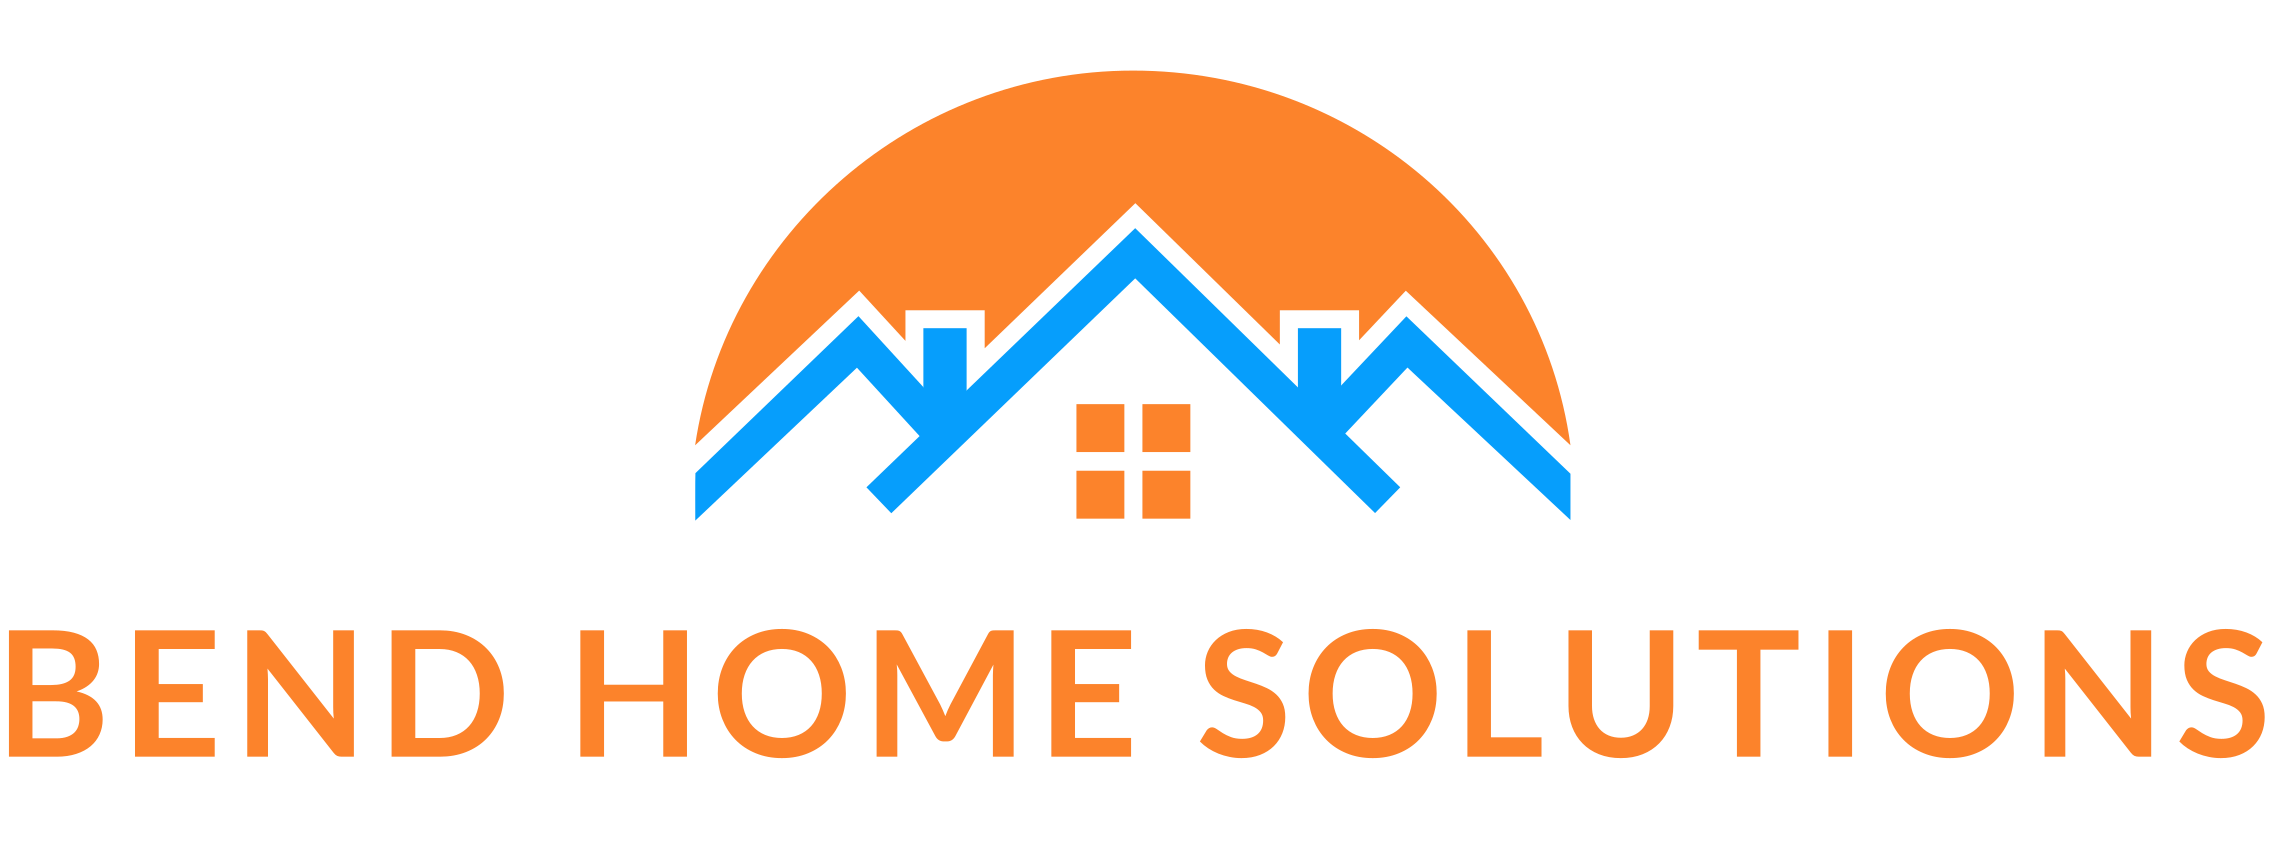 Bend Home Solutions